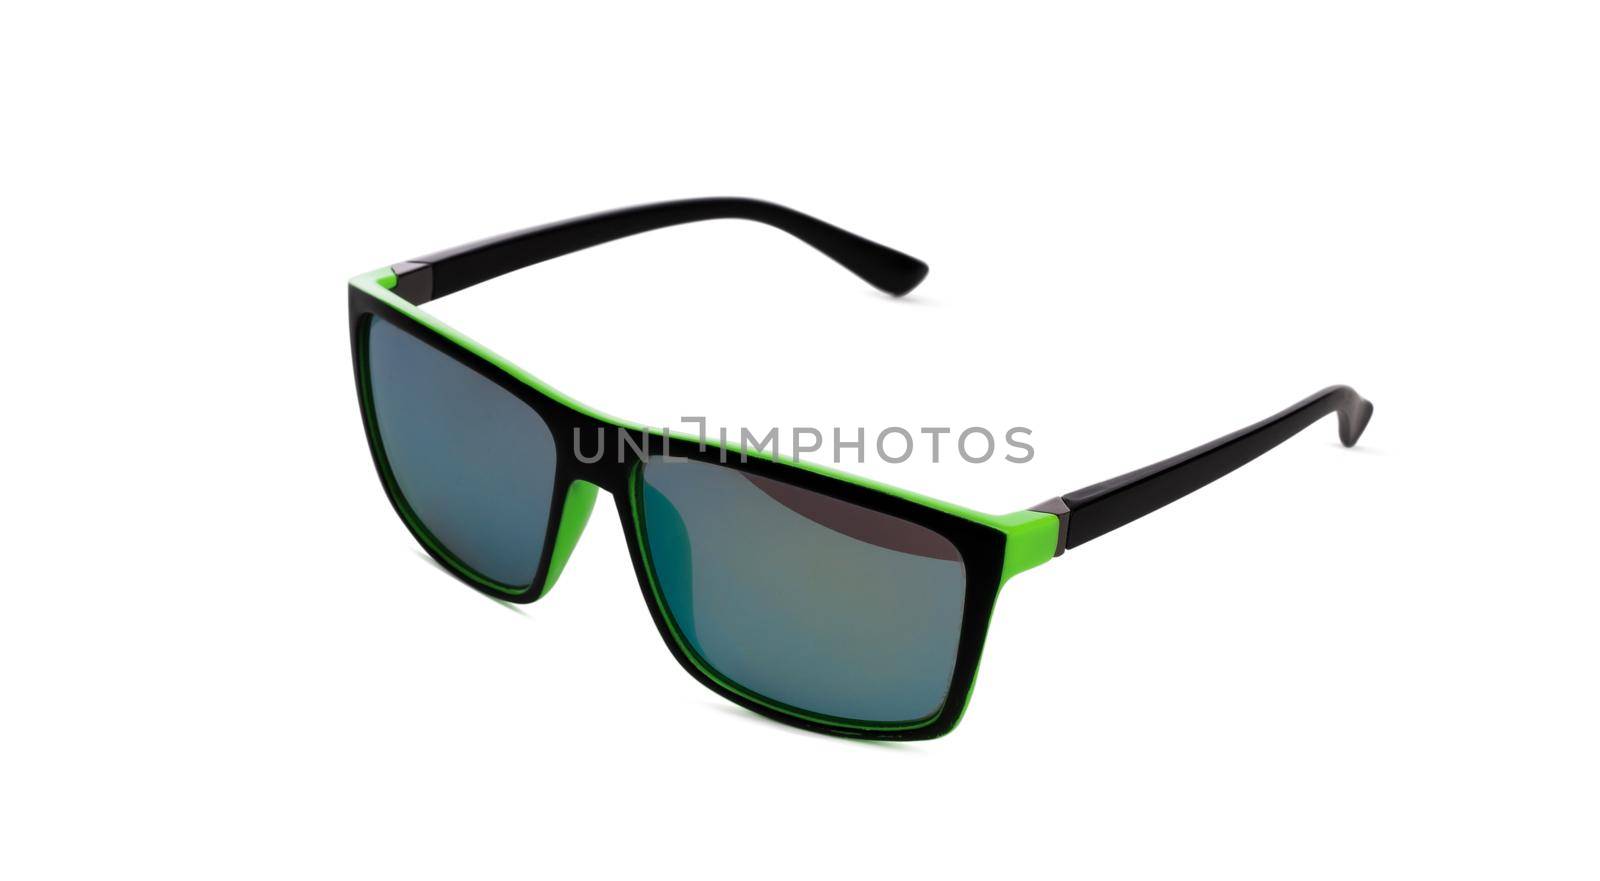 Sunglasses in black frame isolated on white background